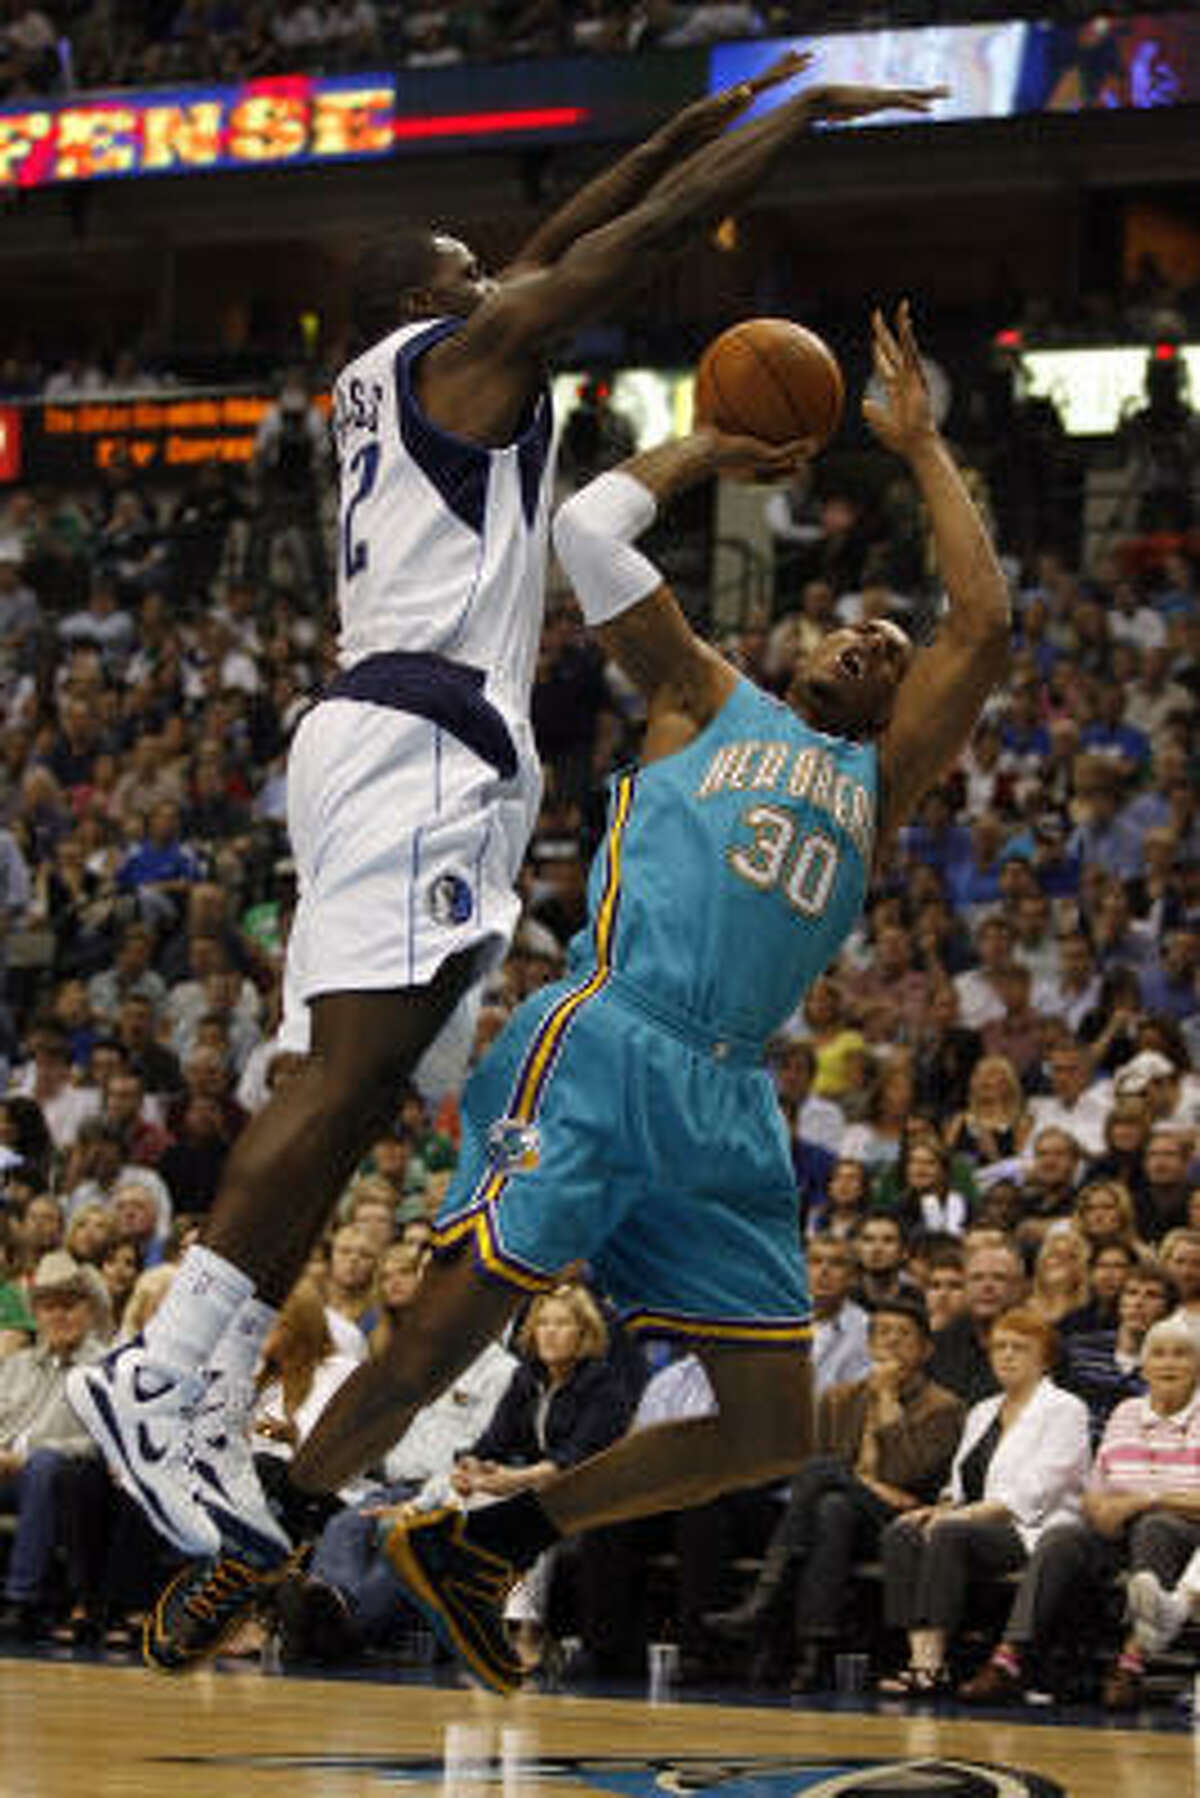 Hornets guard David West tries to shoot over the Mavericks' Brandon Bass in the early going.